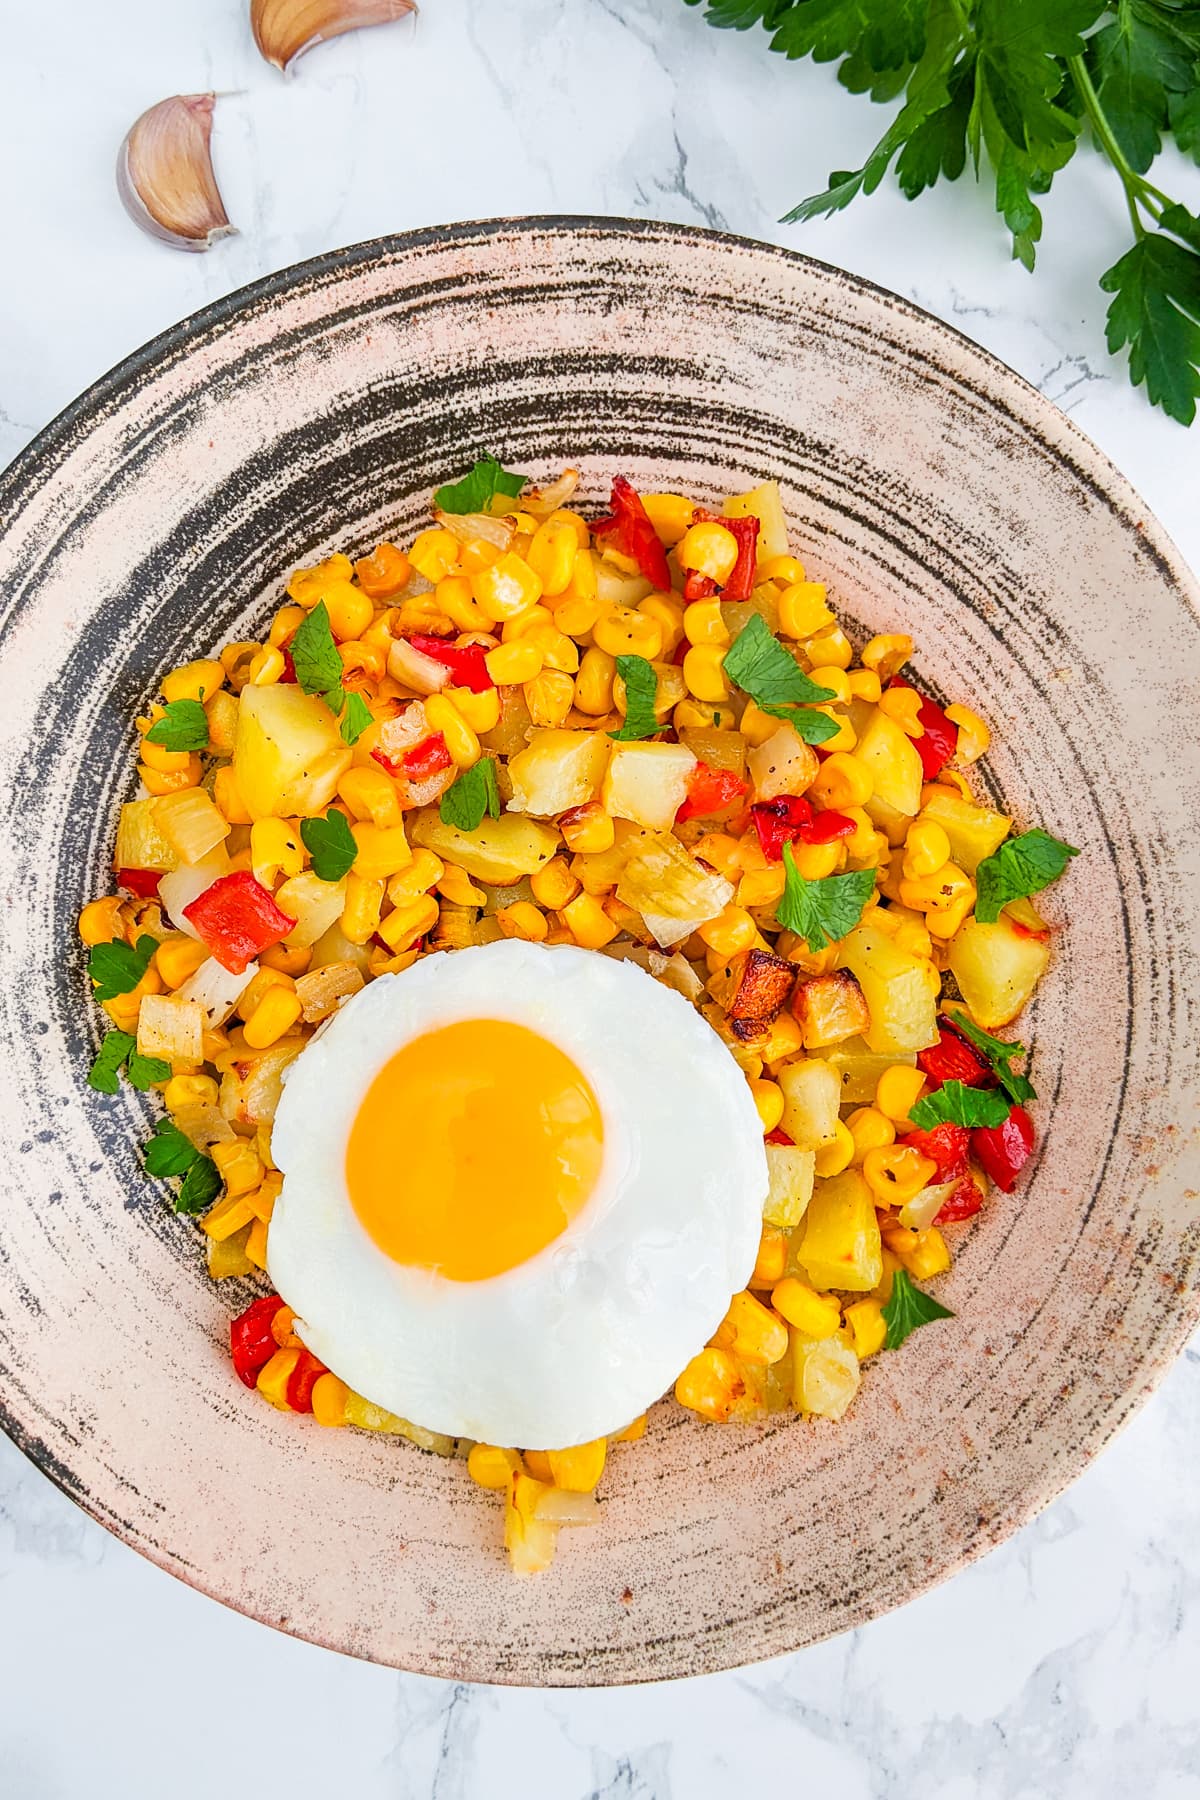 Top view of a vintage plate with corn hash with a fried egg.